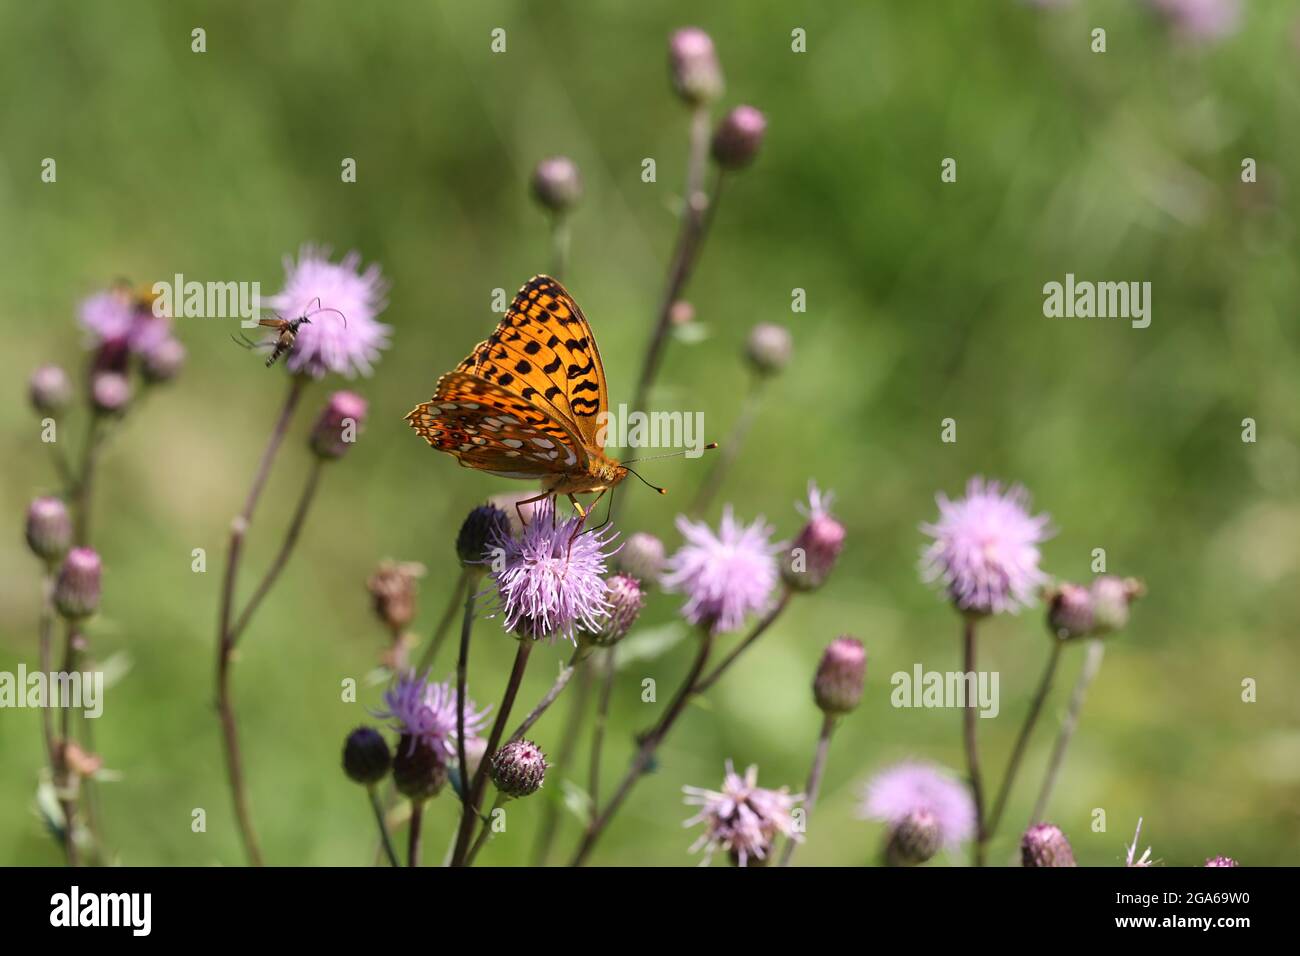 Beautiful close-up of a silver-washed fritillary butterfly sitting on a flower. Stock Photo